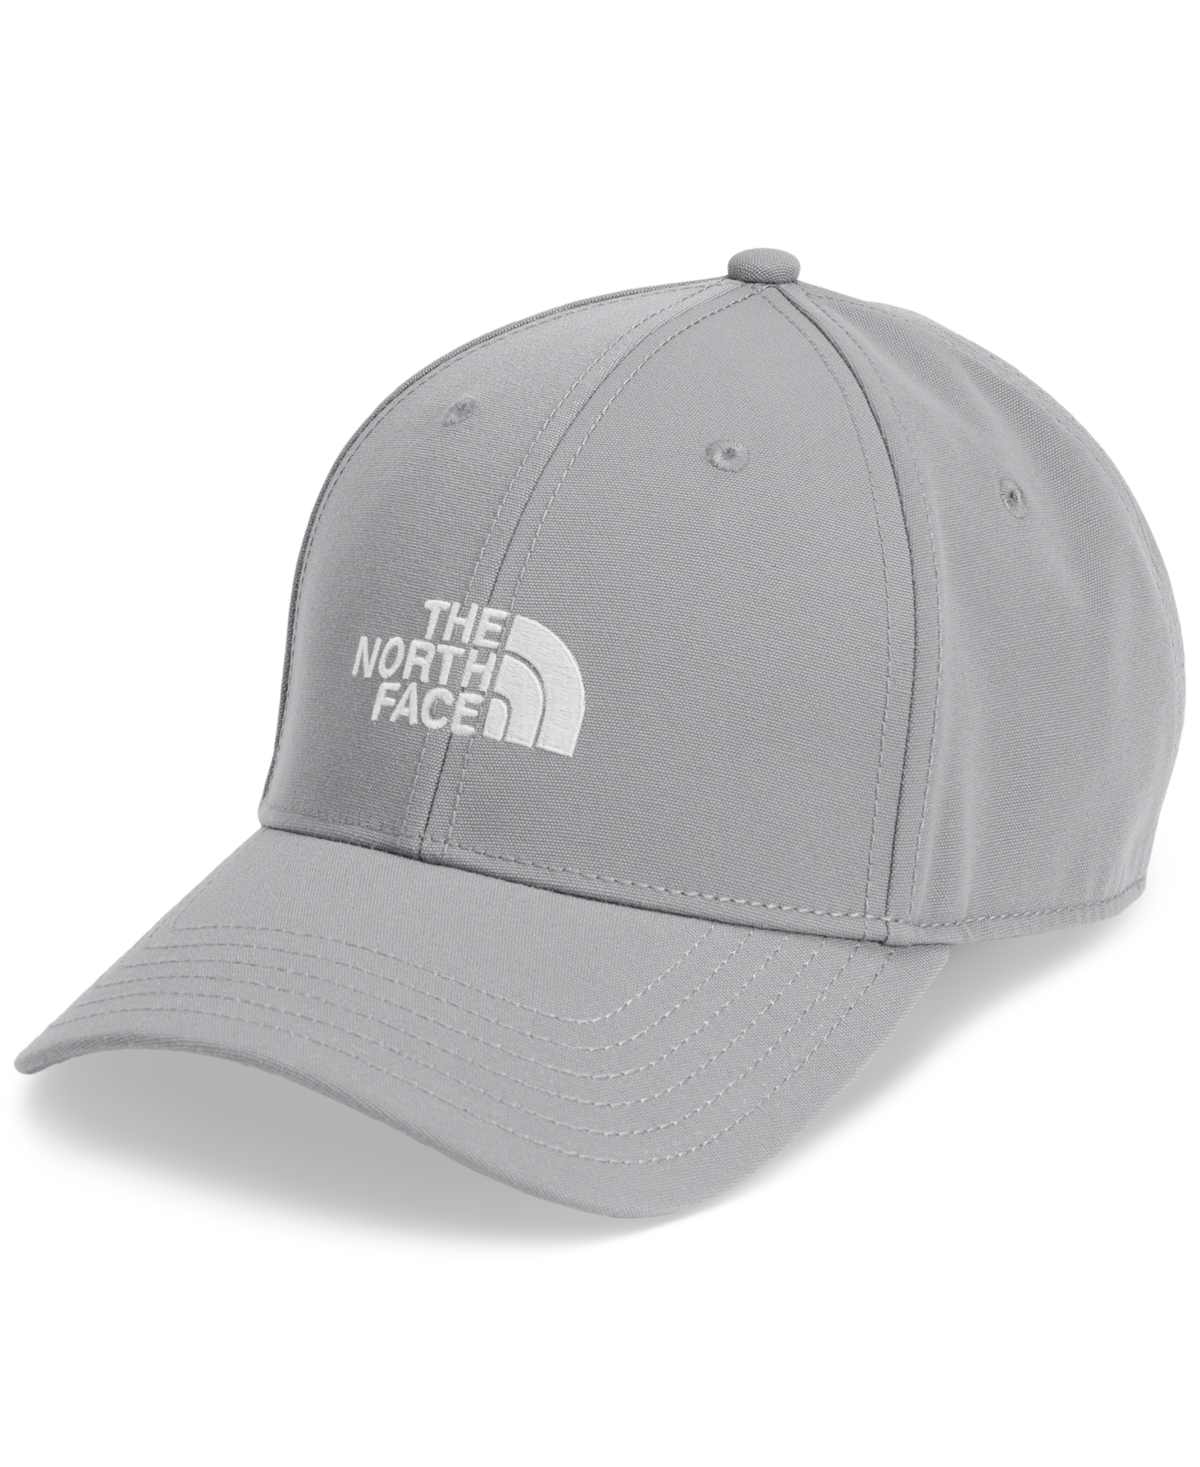 The North Face '66 Classic Hat In Meld Grey